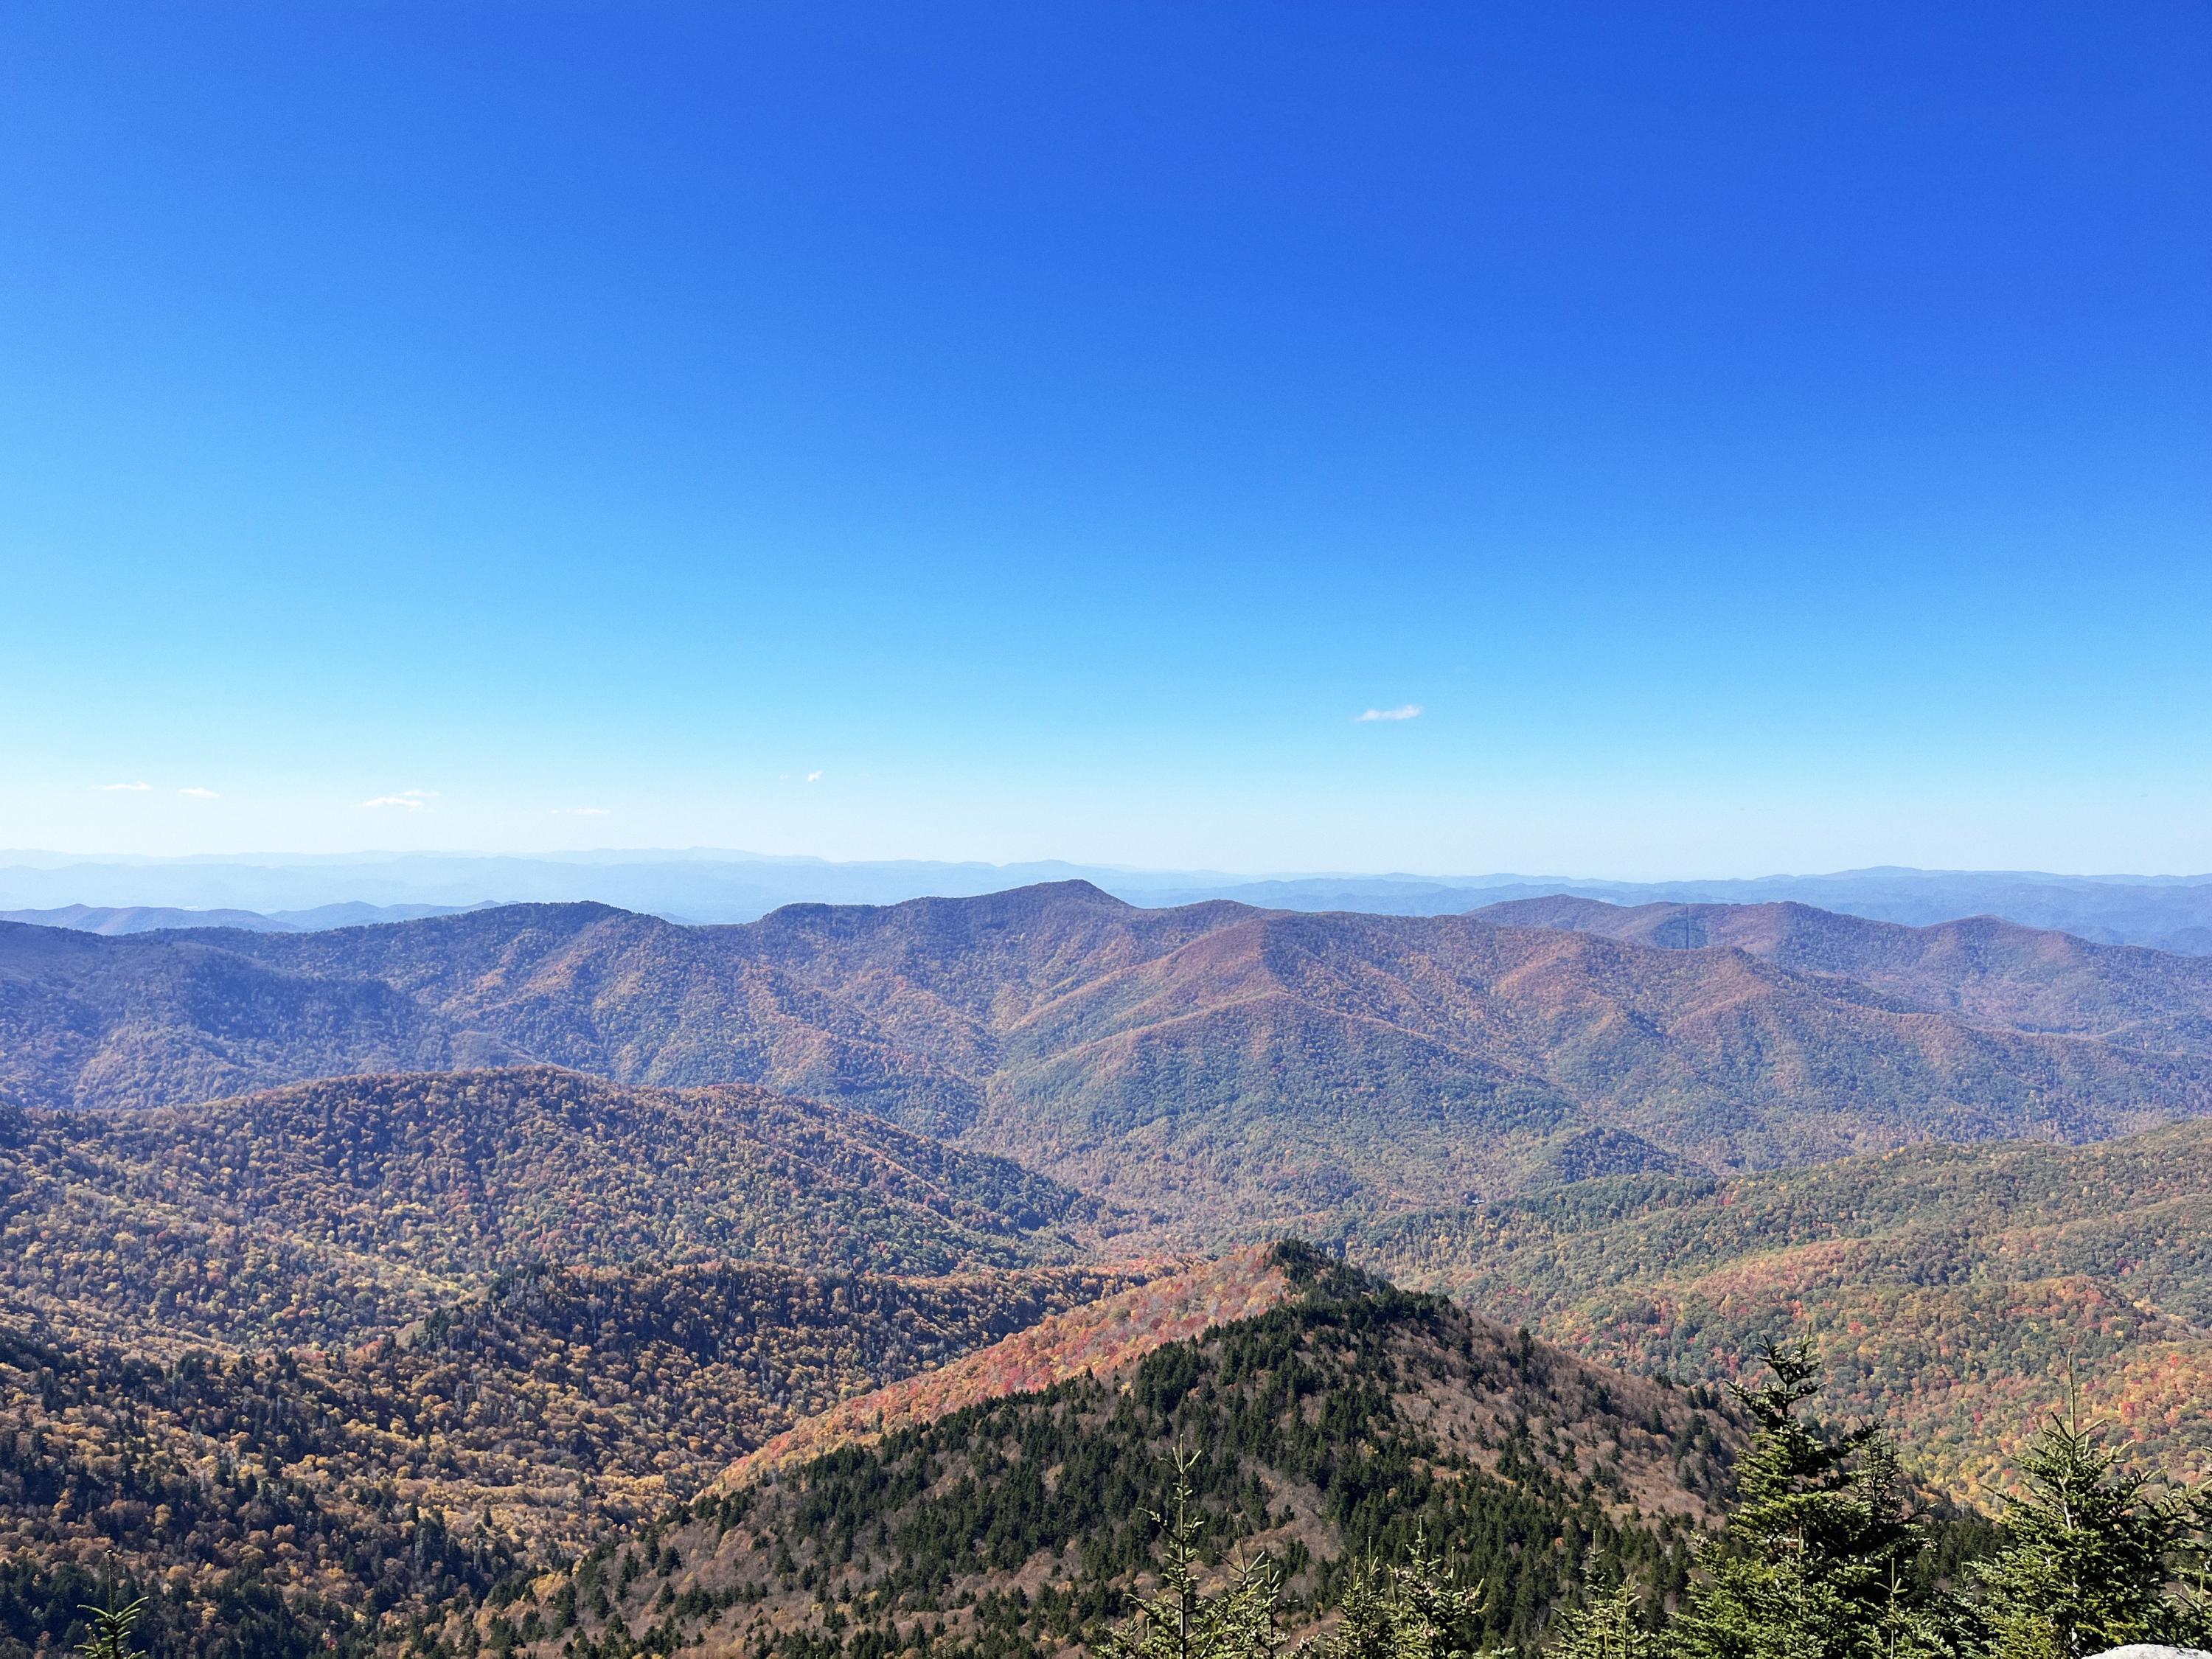 Along the highest peaks in North Carolina, an isolated spruce-fir boreal forest stands as a relict of the Pleistocene, contrasting with deciduous trees on the Southern Appalachians. (Photo: Mount Mitchell State Park by Jess Hunt-Ralston, Georgia Tech)